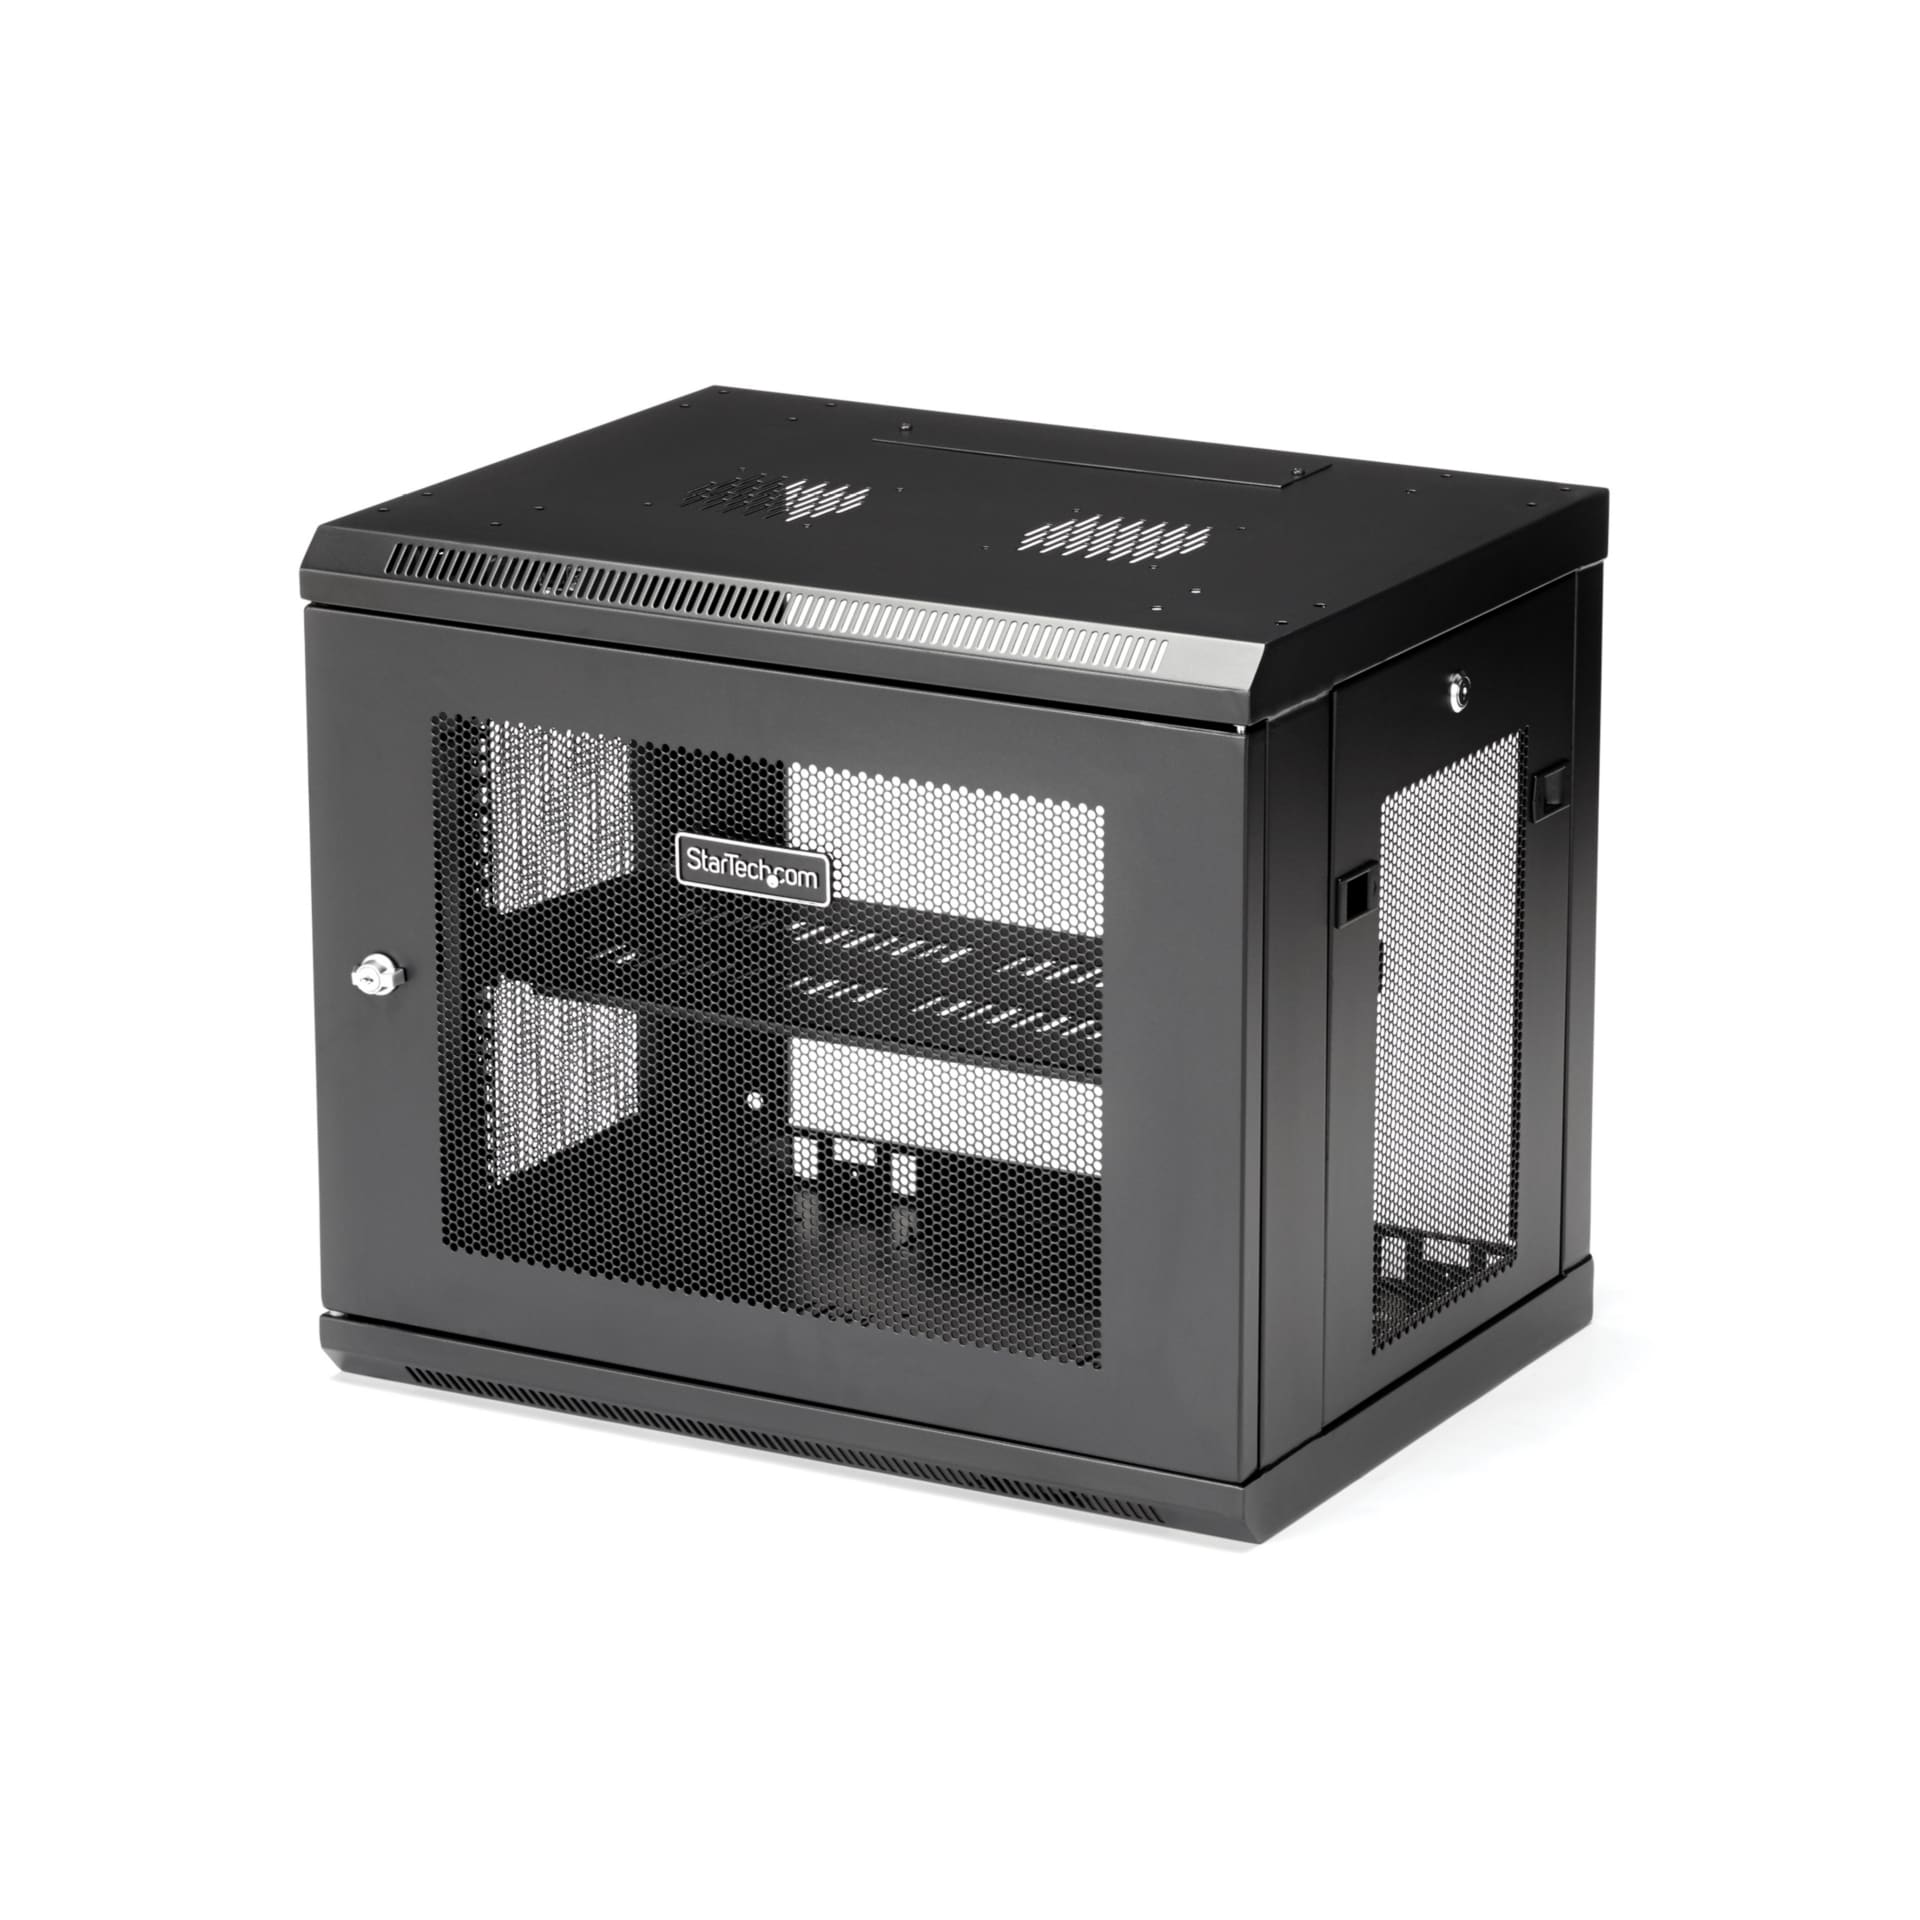 StarTech.com 2-Post 9U Wall Mount Network Cabinet, 19" Lockable Wall-Mounted Server Rack Enclosure for IT Equipment